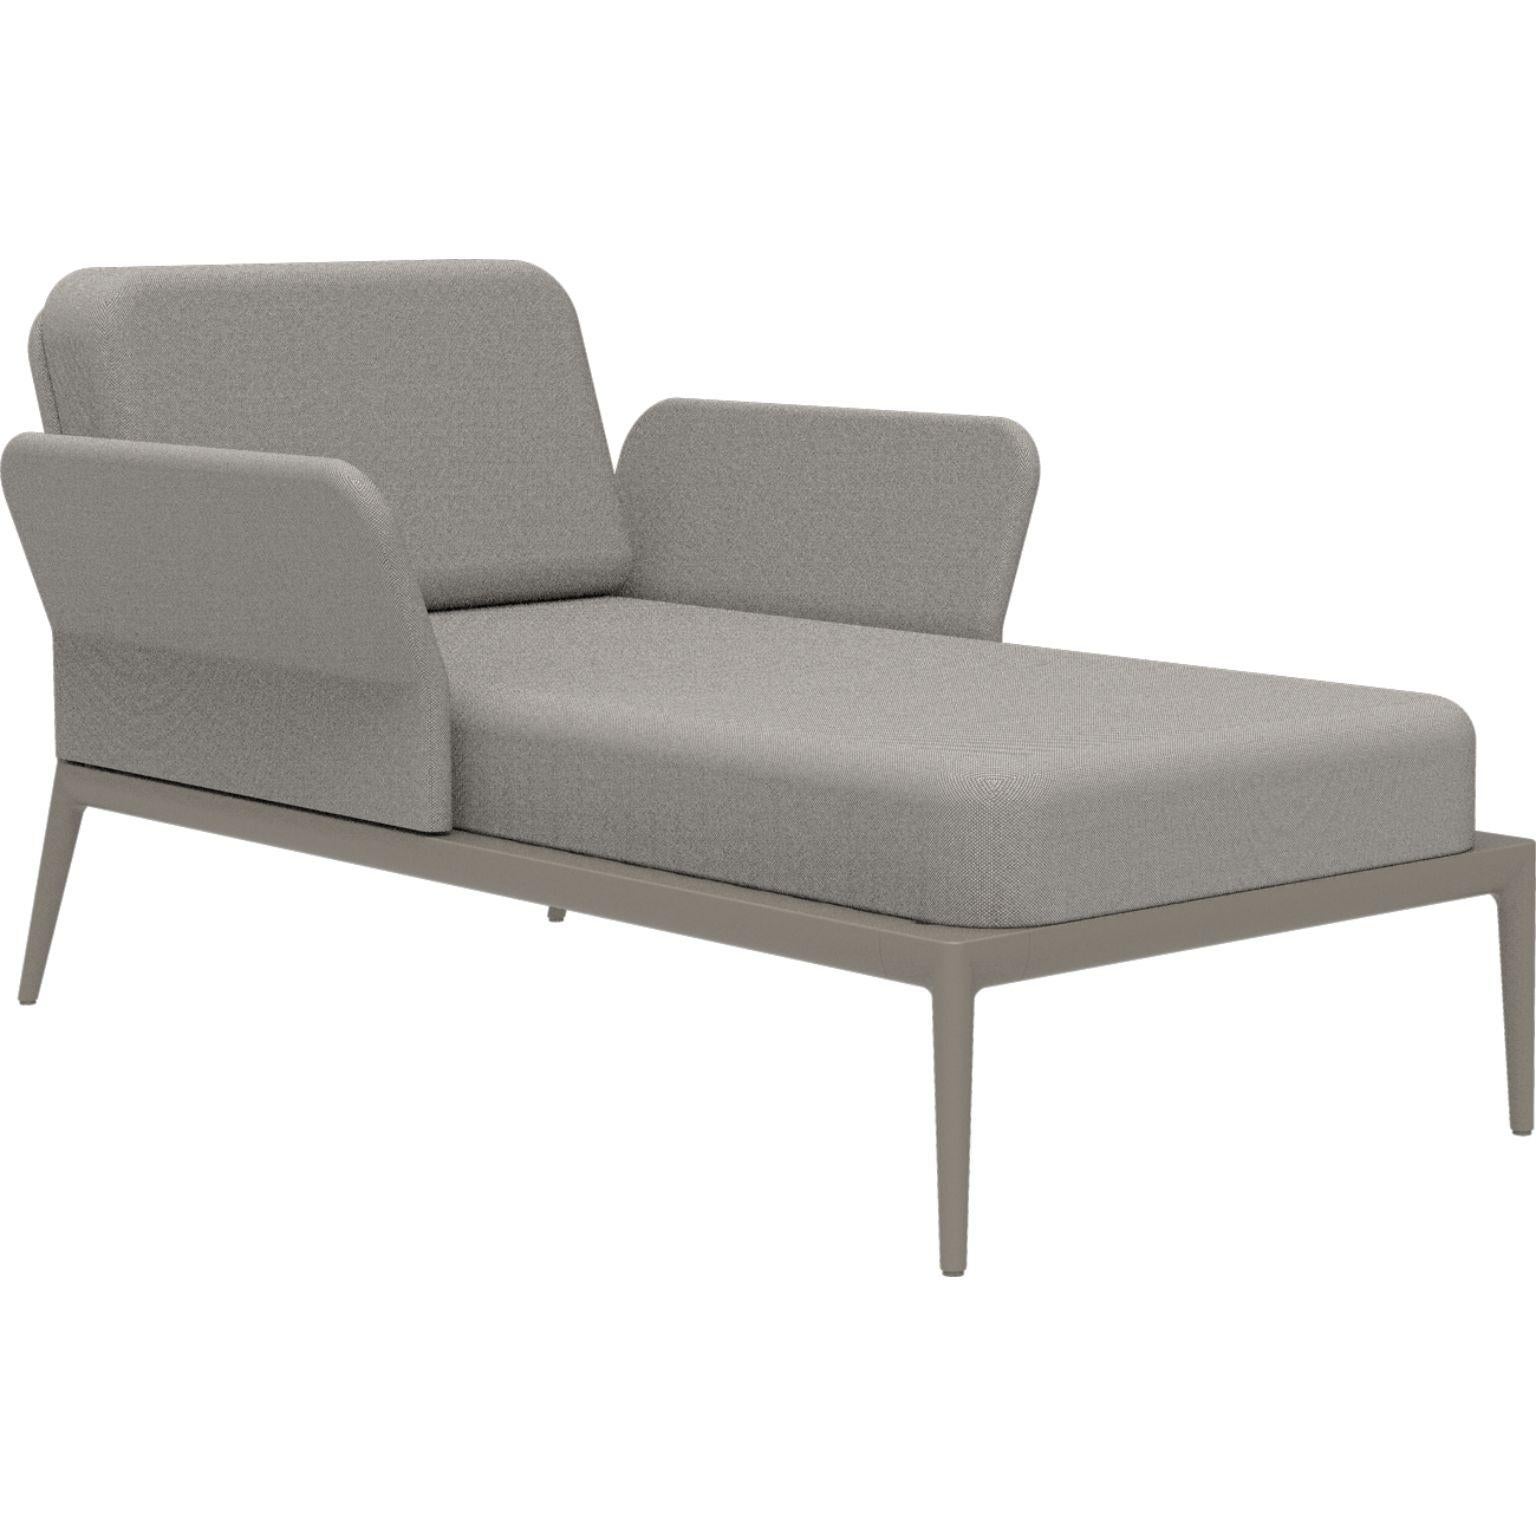 Cover cream divan by MOWEE.
Dimensions: D91 x W155 x H81 cm (seat height 42 cm).
Material: aluminum and upholstery.
Weight: 30 kg.
Also available in different colors and finishes. 

An unmistakable collection for its beauty and robustness. A